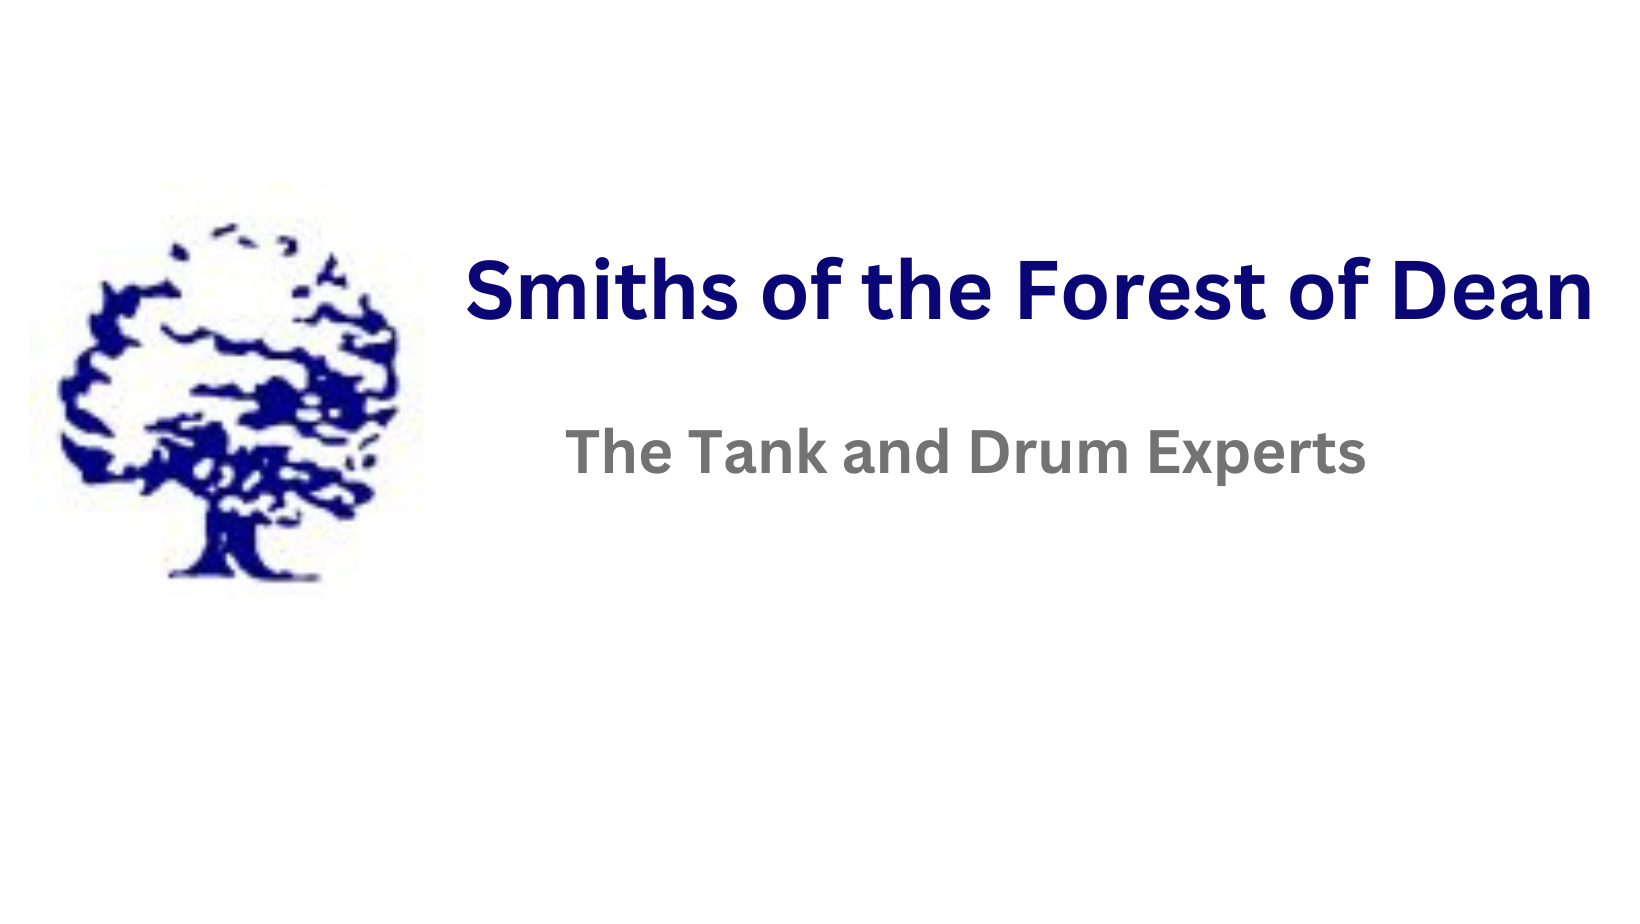 smiths of the forest of dean